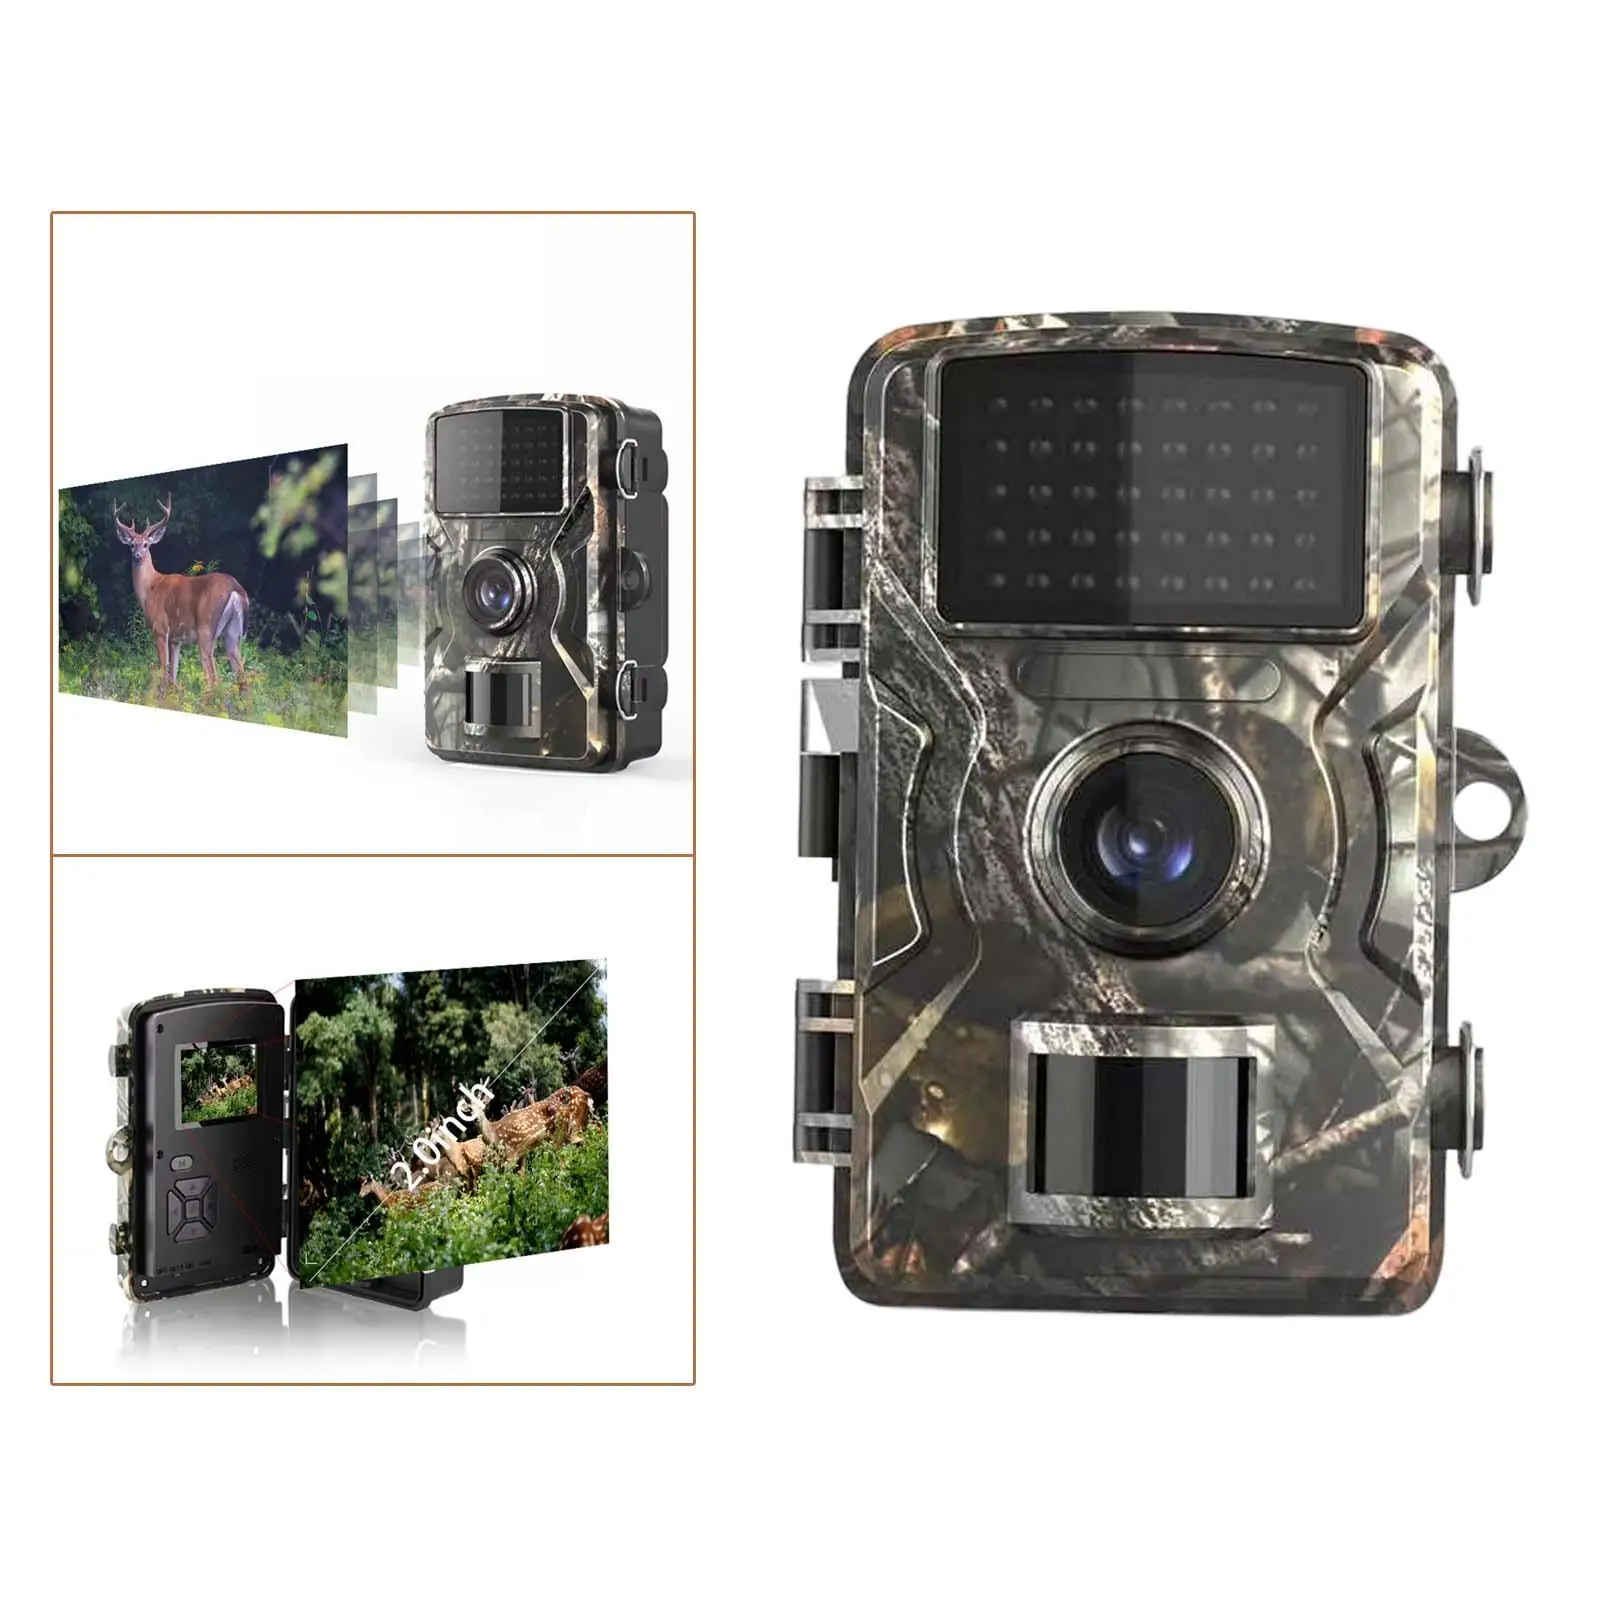 1920x1080 Trail Camera 49ft Vision for Wildlife Viewing Crop